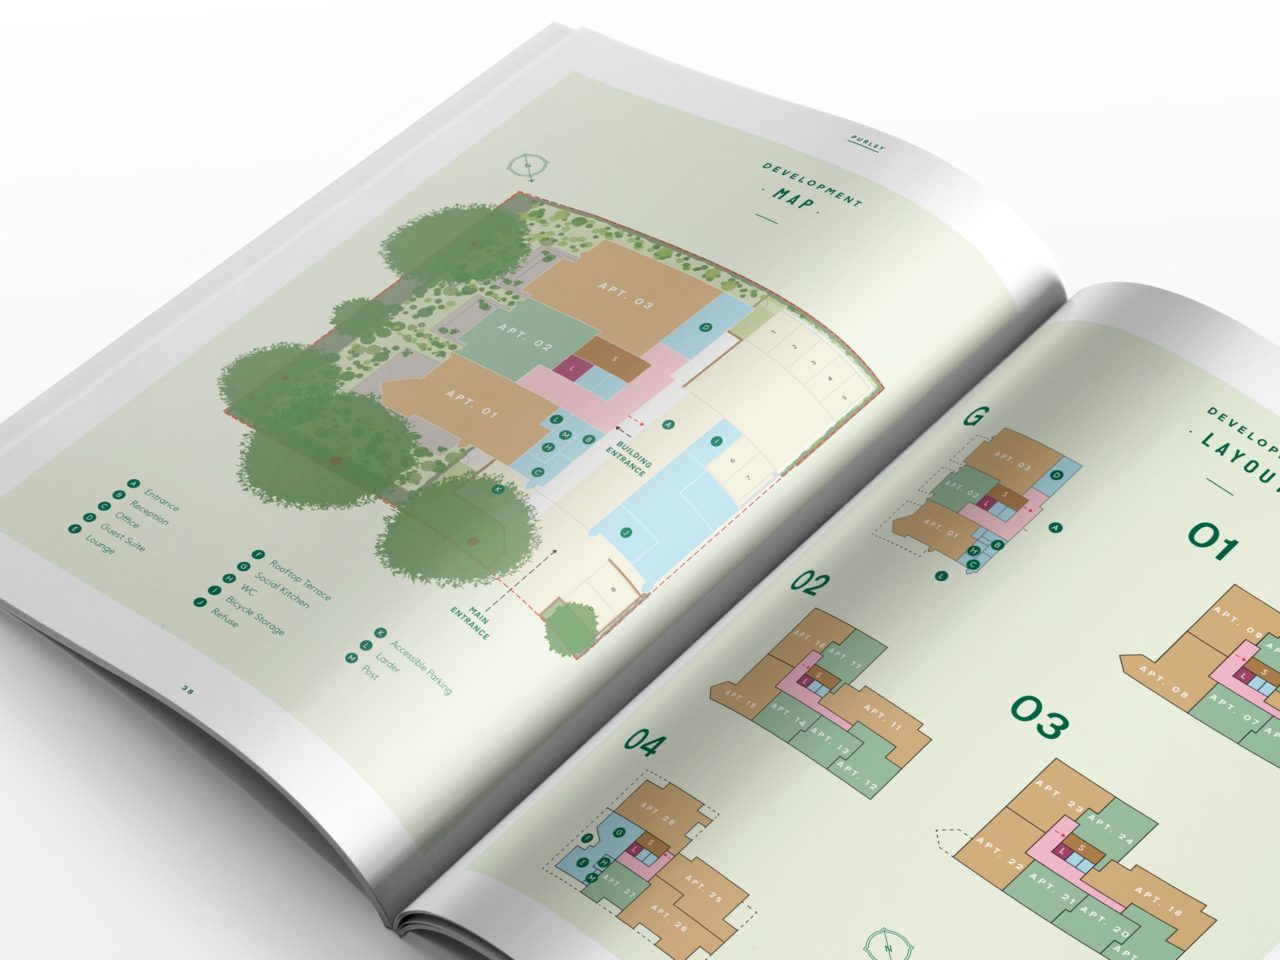 An image to show interior spreads from a branded brochure. Image includes site map, floor plates and floor plans.